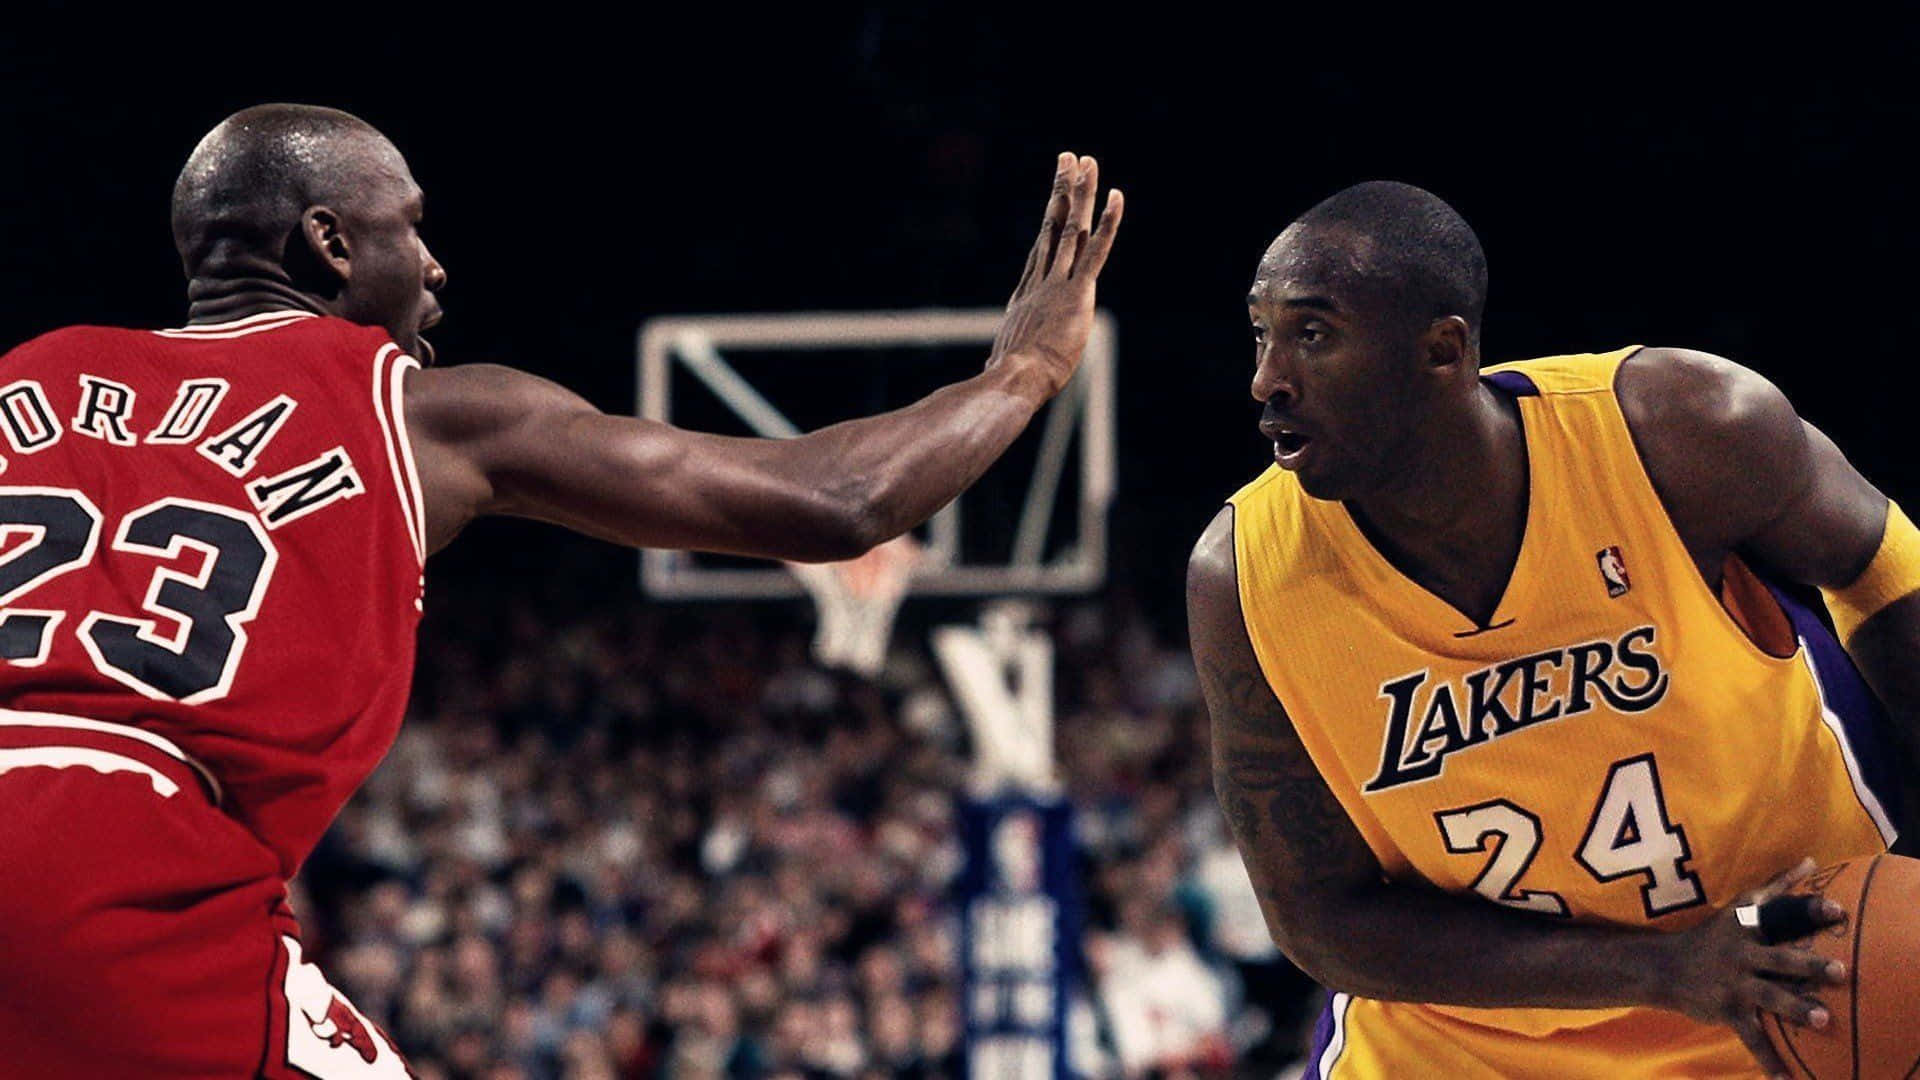 Michael Jordan and Kobe Bryant Together in a Legendary Moment Wallpaper